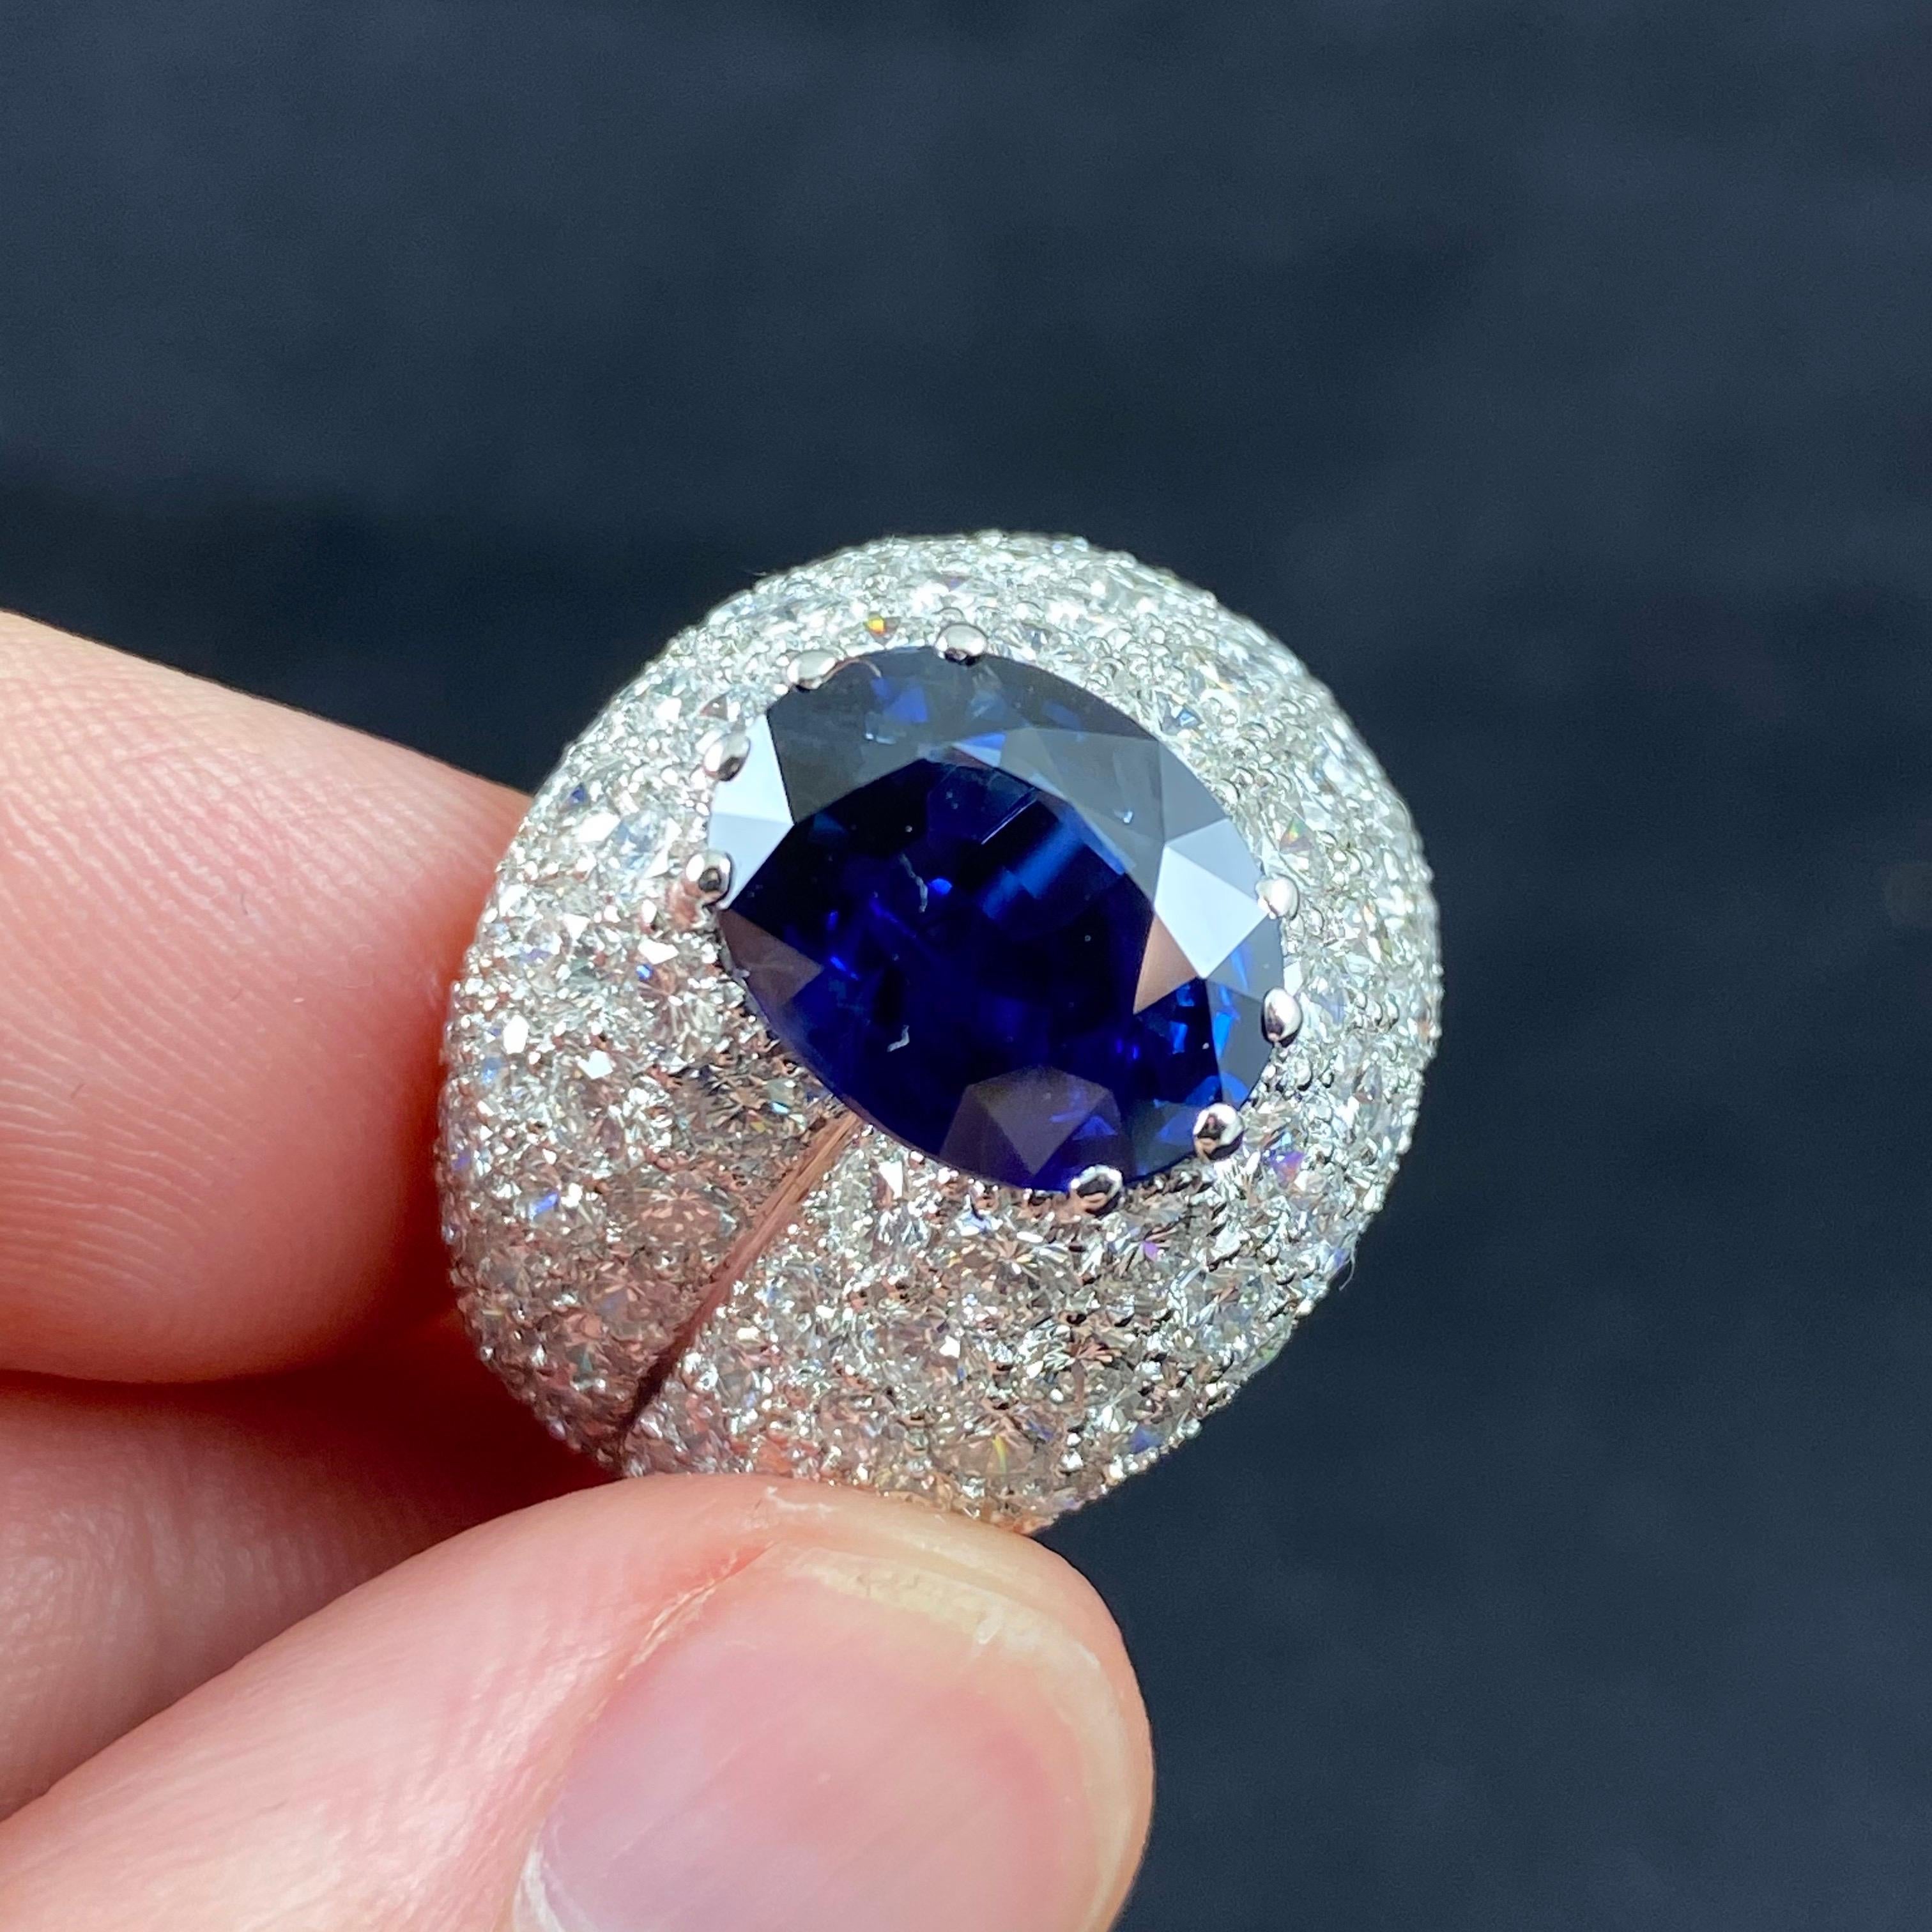 A contemporary royal blue Ceylon sapphire and diamond cocktail or dress ring in 19.2kt white gold, Portugal, 2010s. This ring features a 4.60ct oval mixed-cut sapphire of a vivid royal blue color claw-set to the centre, surrounded by a sea of